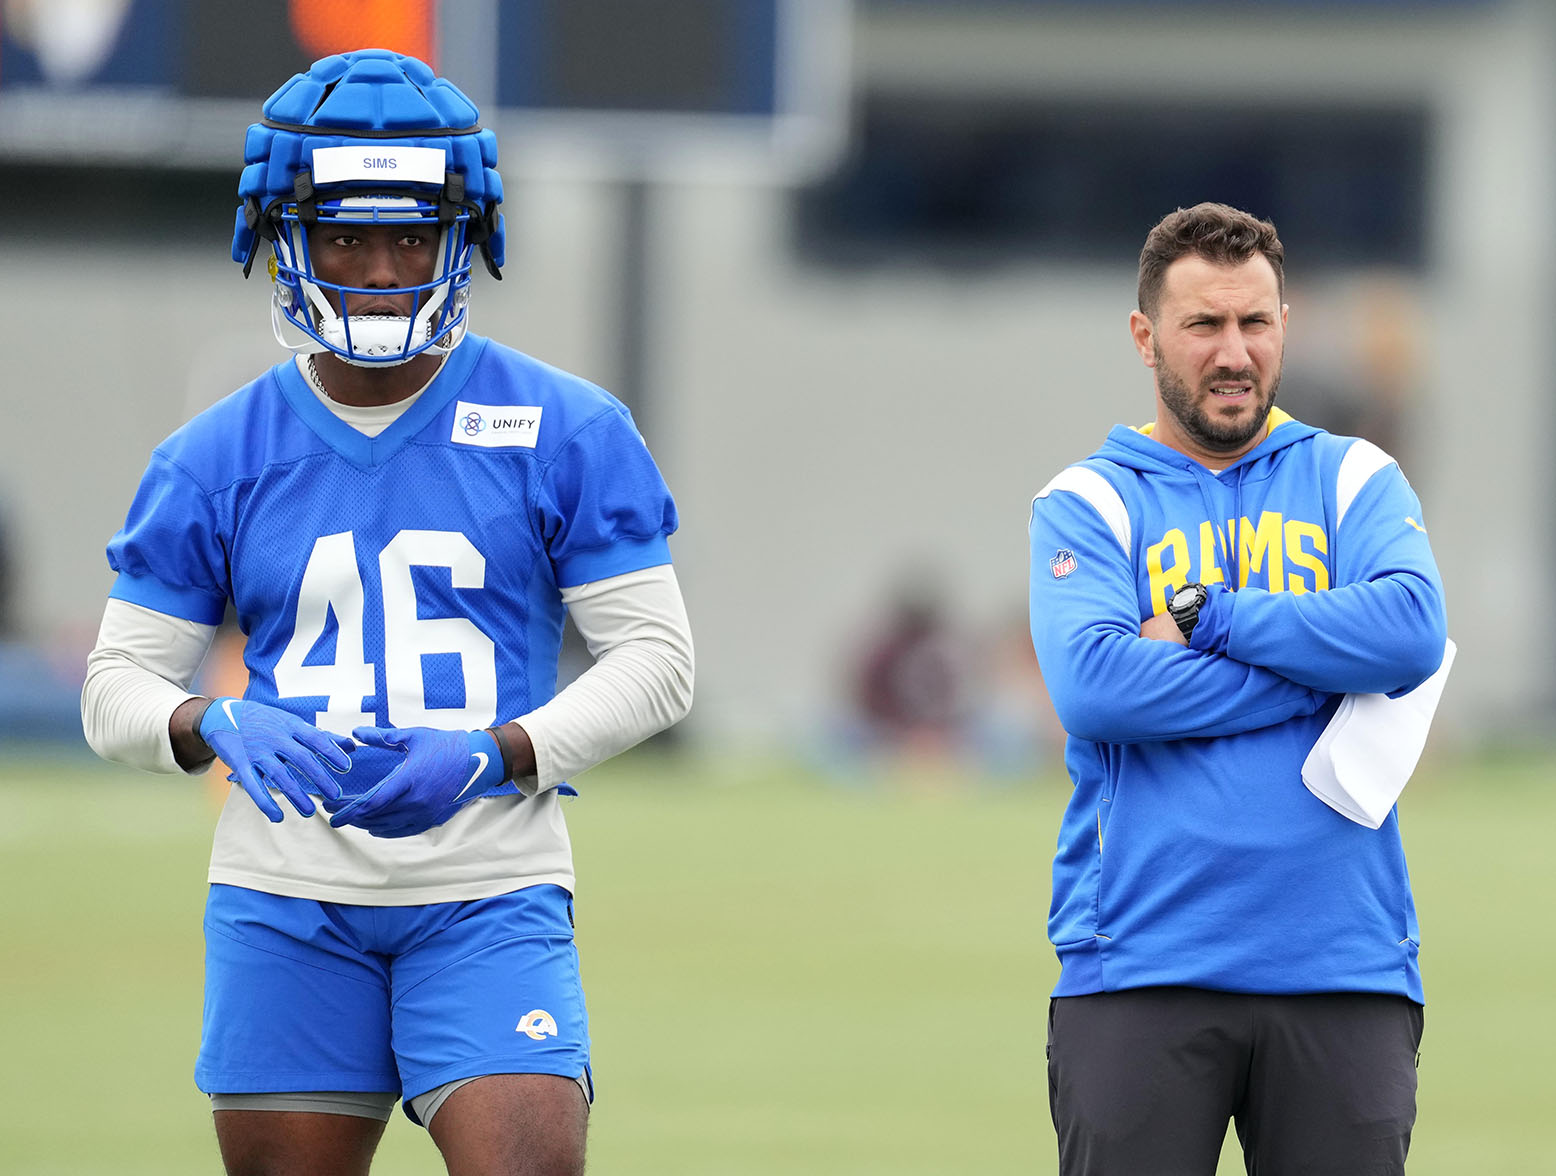 Jun 14, 2023; Thousand Oaks, CA, USA; Los Angeles Rams tight ends coach Nick Caley and tight end Christian Sims (46) during minicamp at Cal Lutheran University. Mandatory Credit: Kirby Lee-USA TODAY Sports